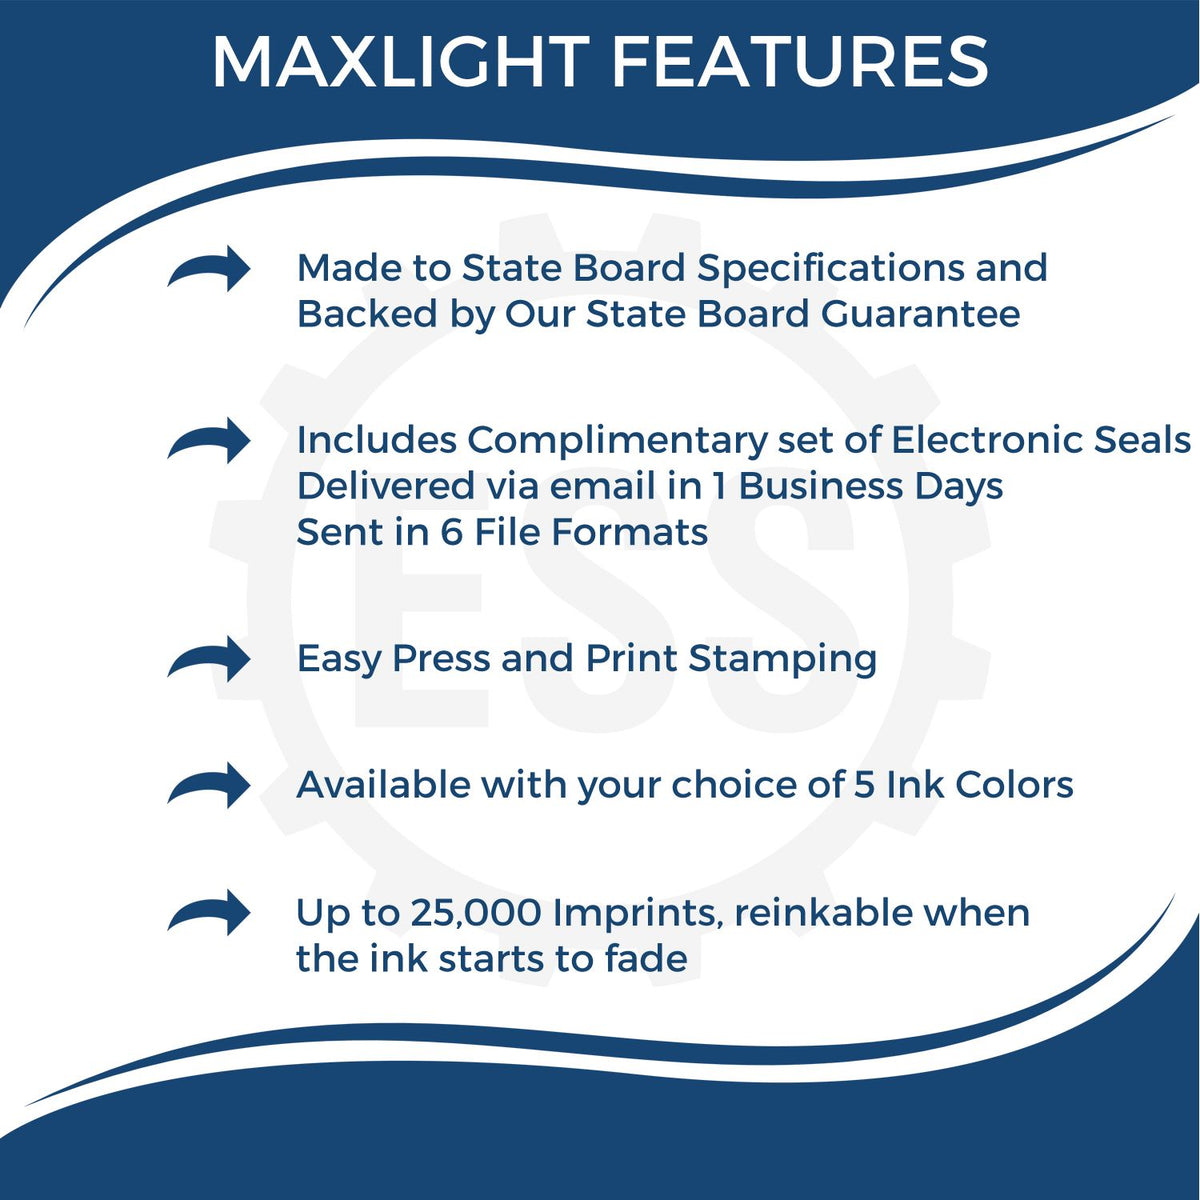 A picture of an infographic highlighting the selling points for the MaxLight Premium Pre-Inked New Hampshire State Seal Notarial Stamp